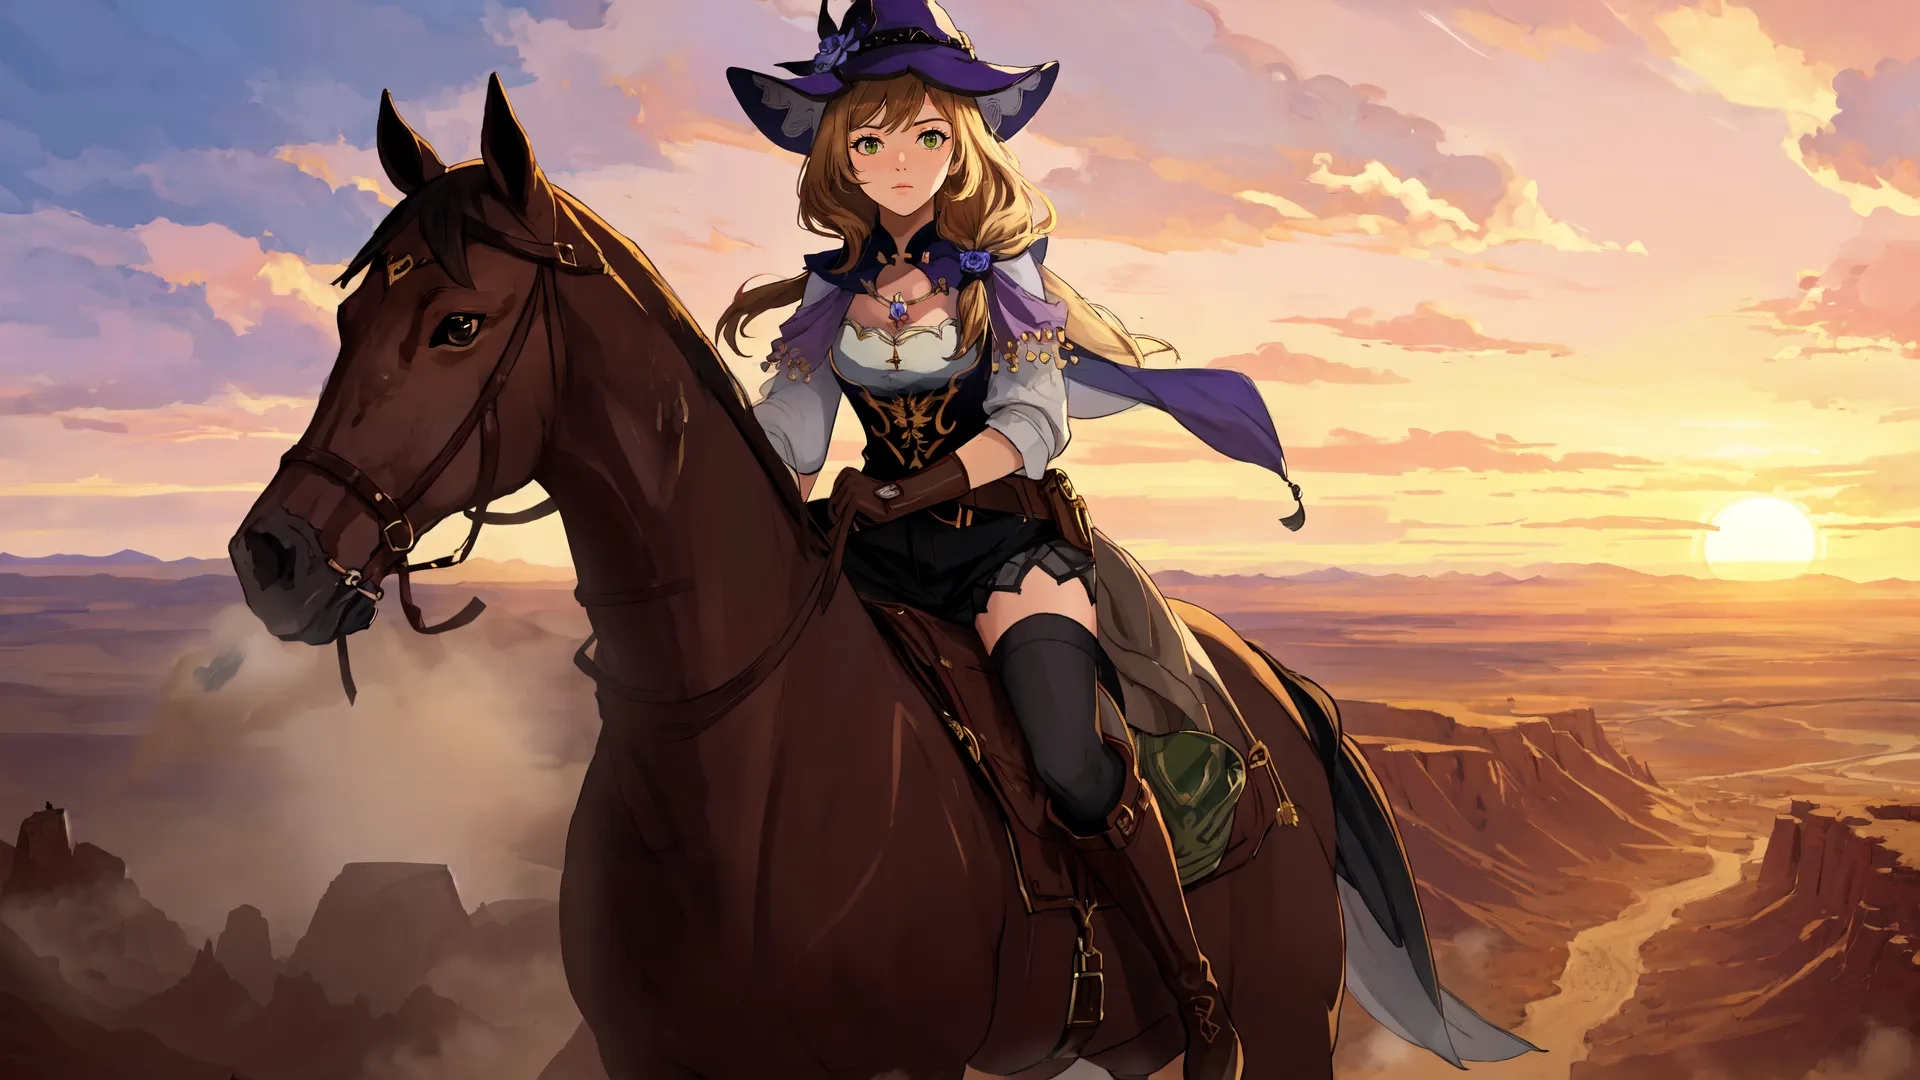 a woman in western costume riding a horse at sunset
